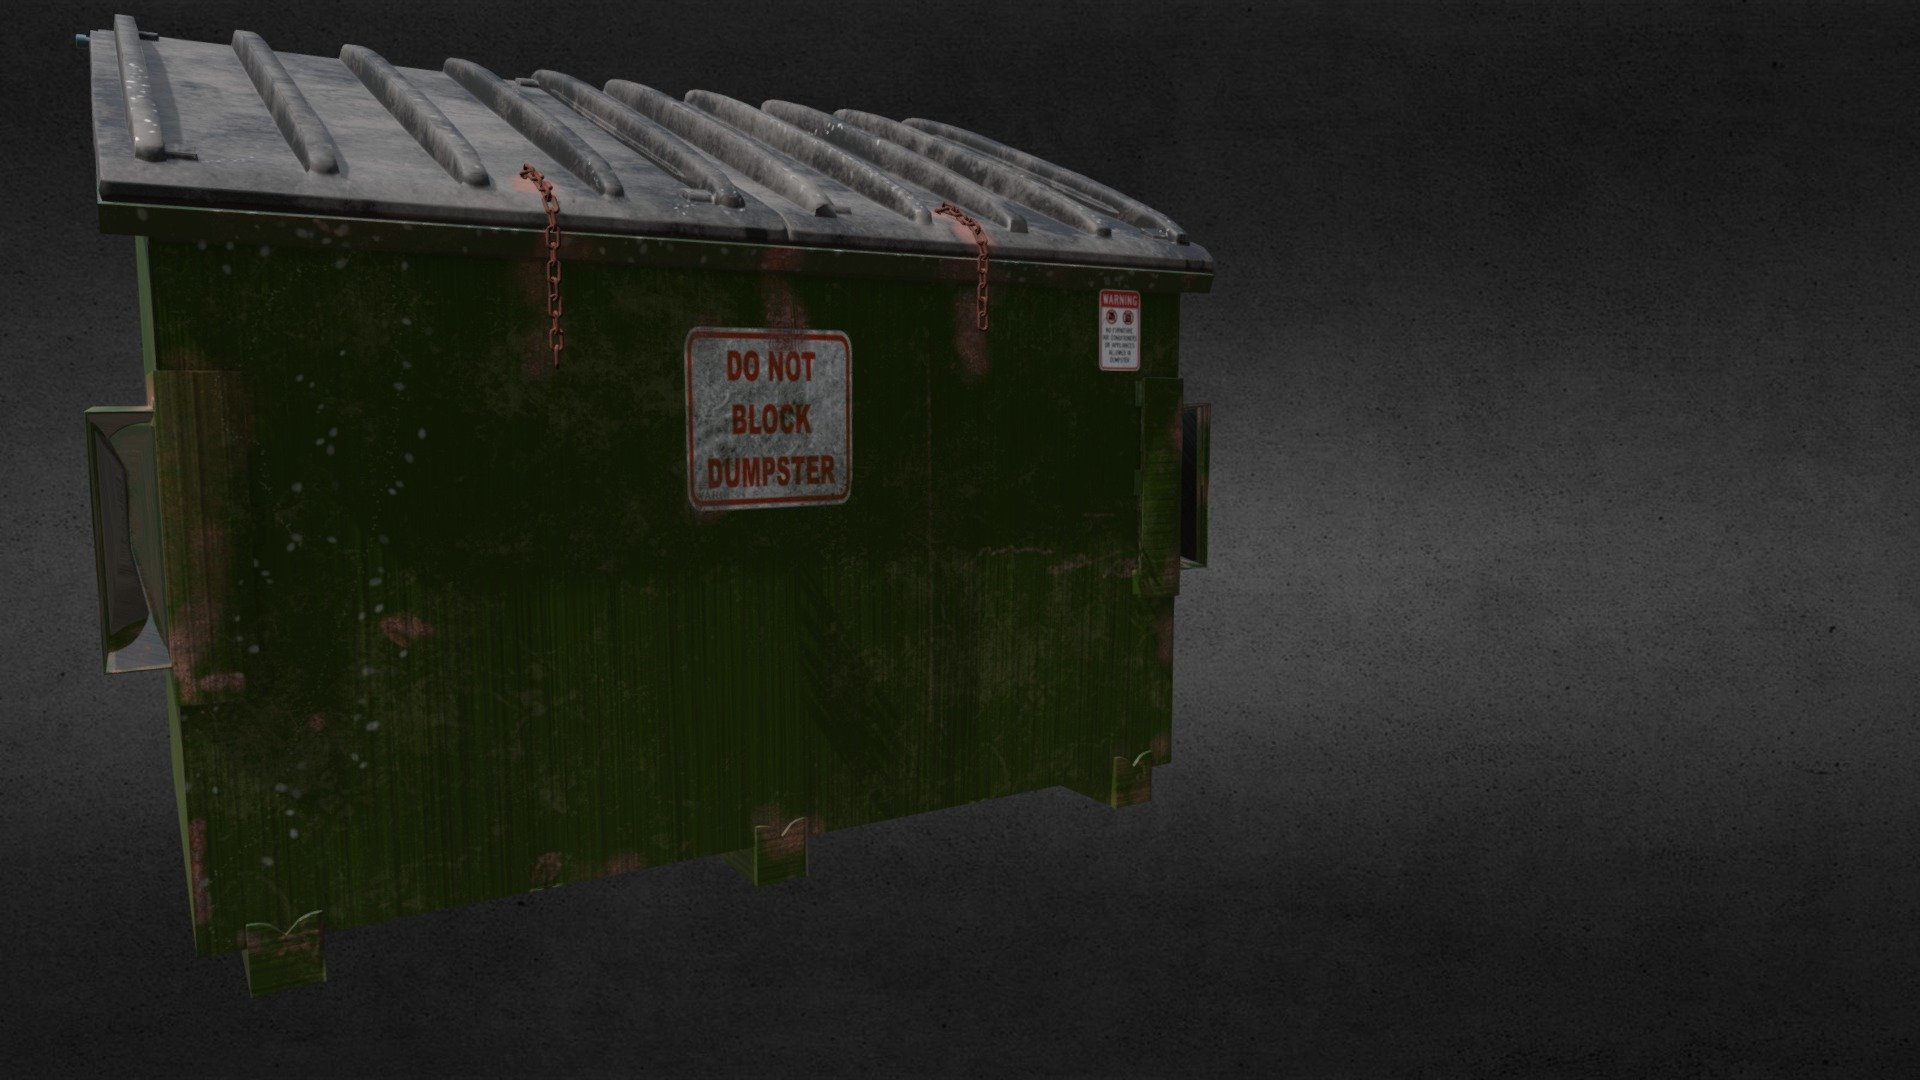 This is a dumpster I created for class. Final 3d model